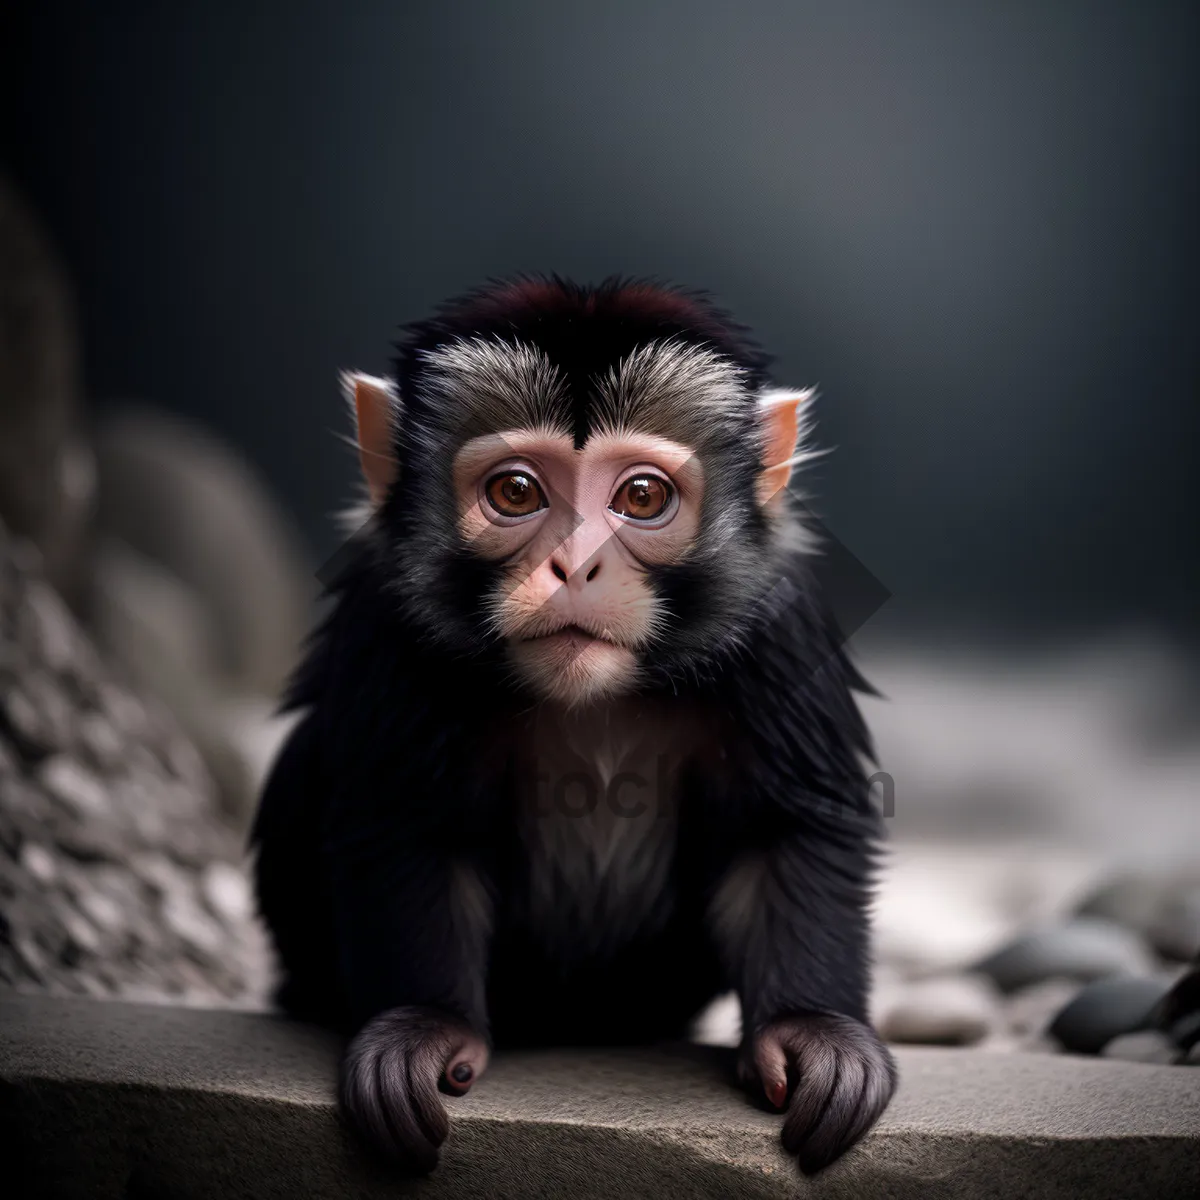 Picture of Adorable Baby Primate Portrait in Wildlife Zoo